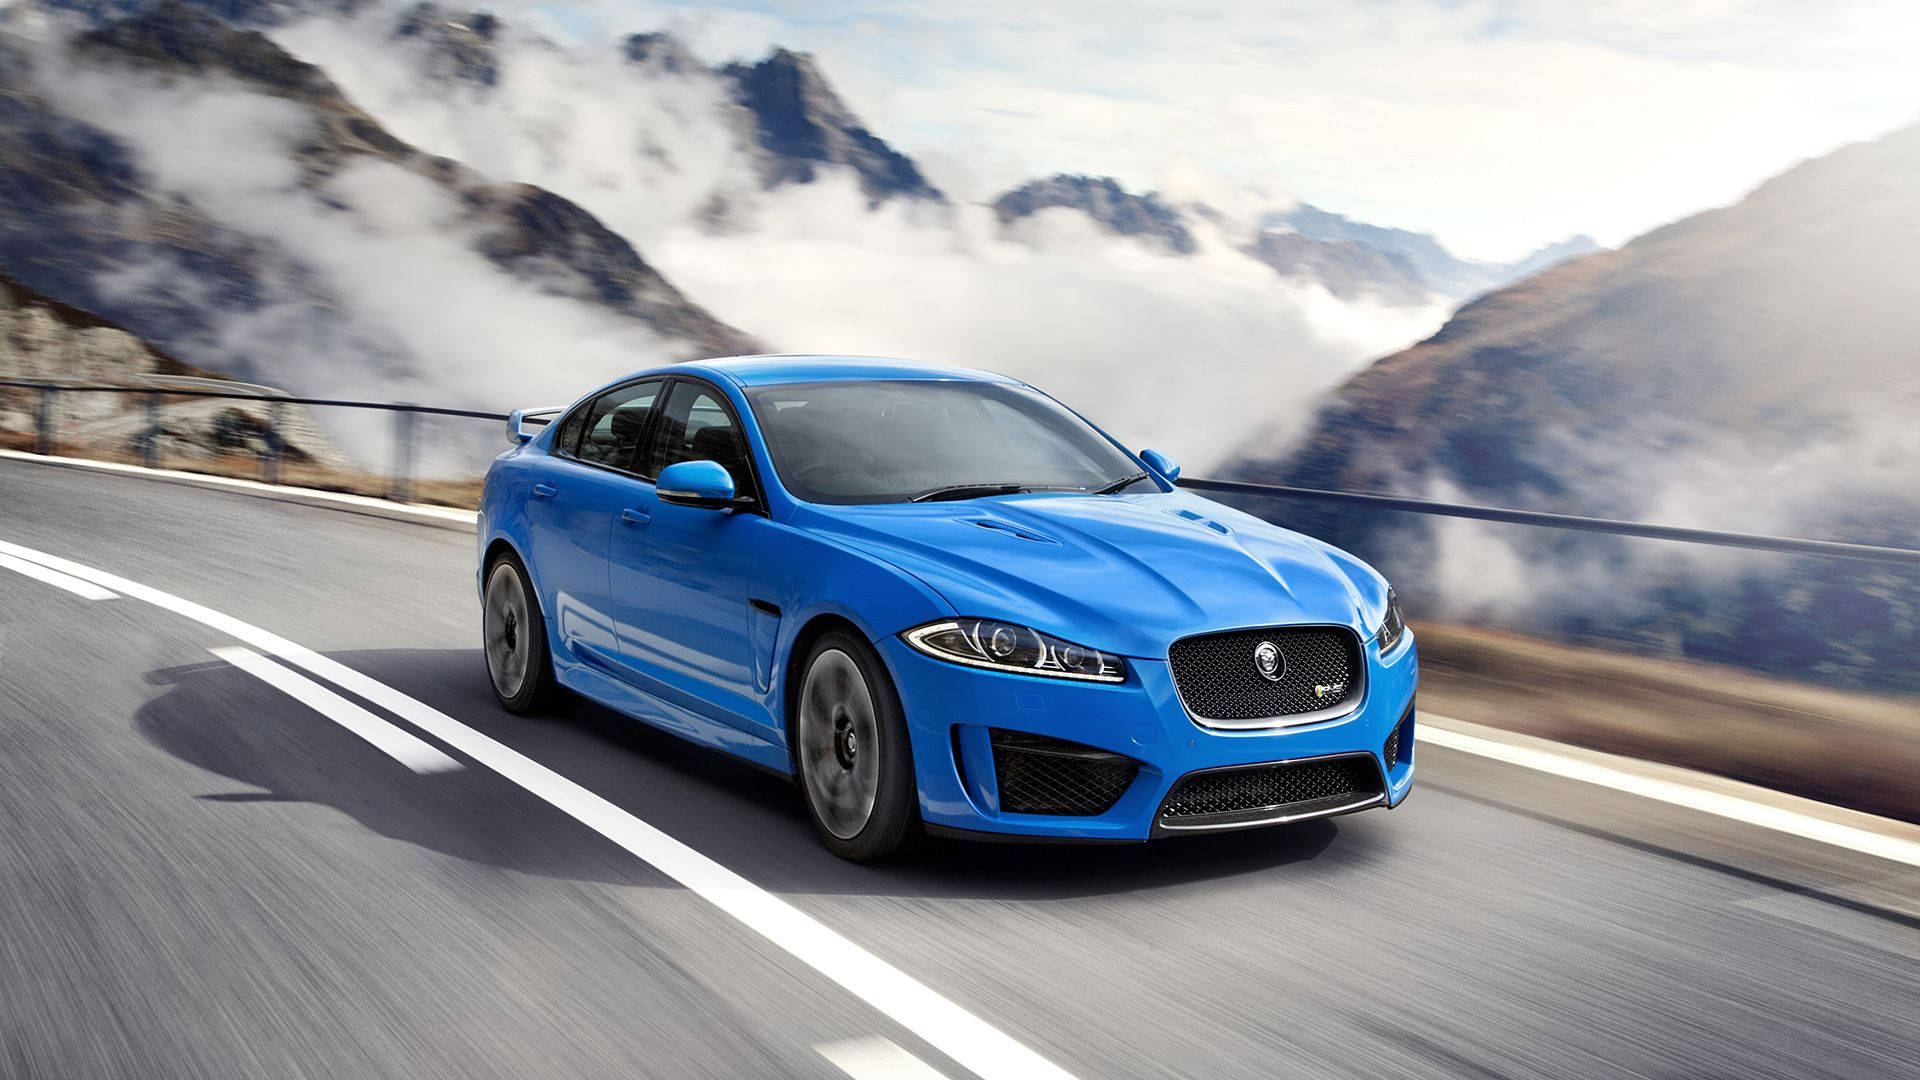 Experience The Majesty of the Wild in A Blue Jaguar Wallpaper